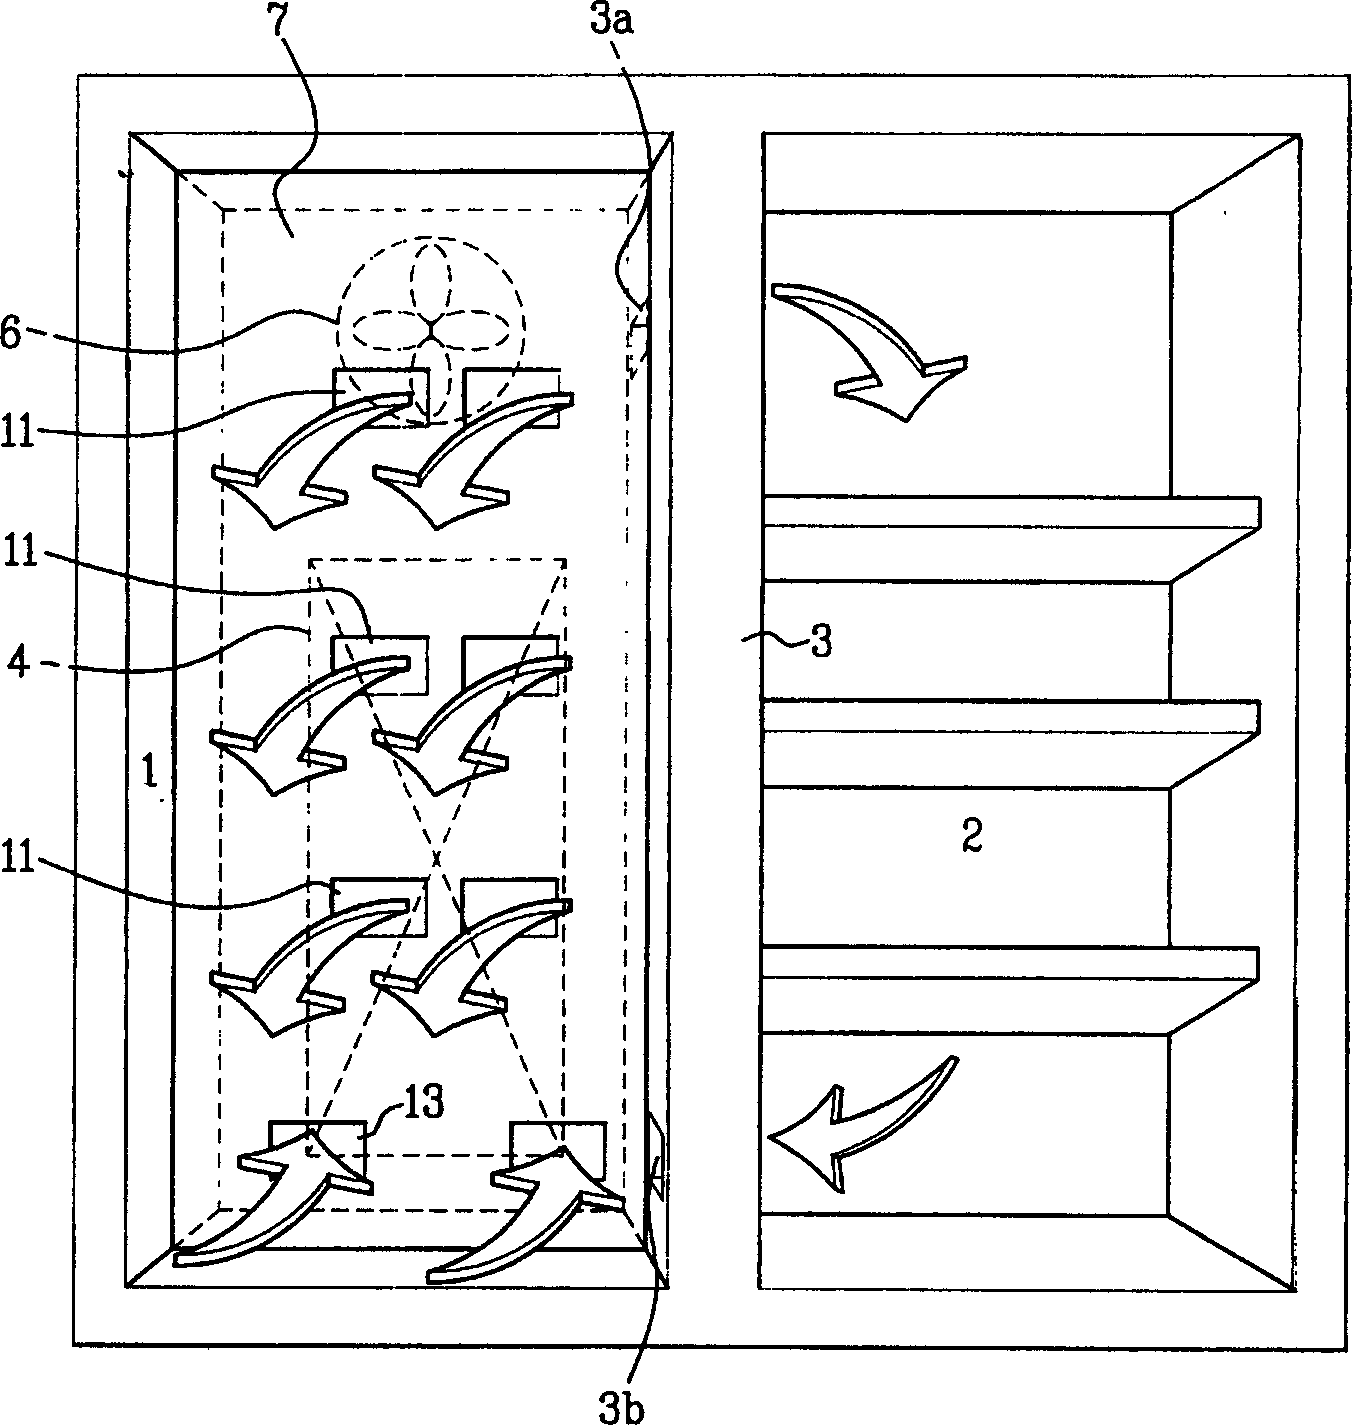 Parallel cooling refrigerator